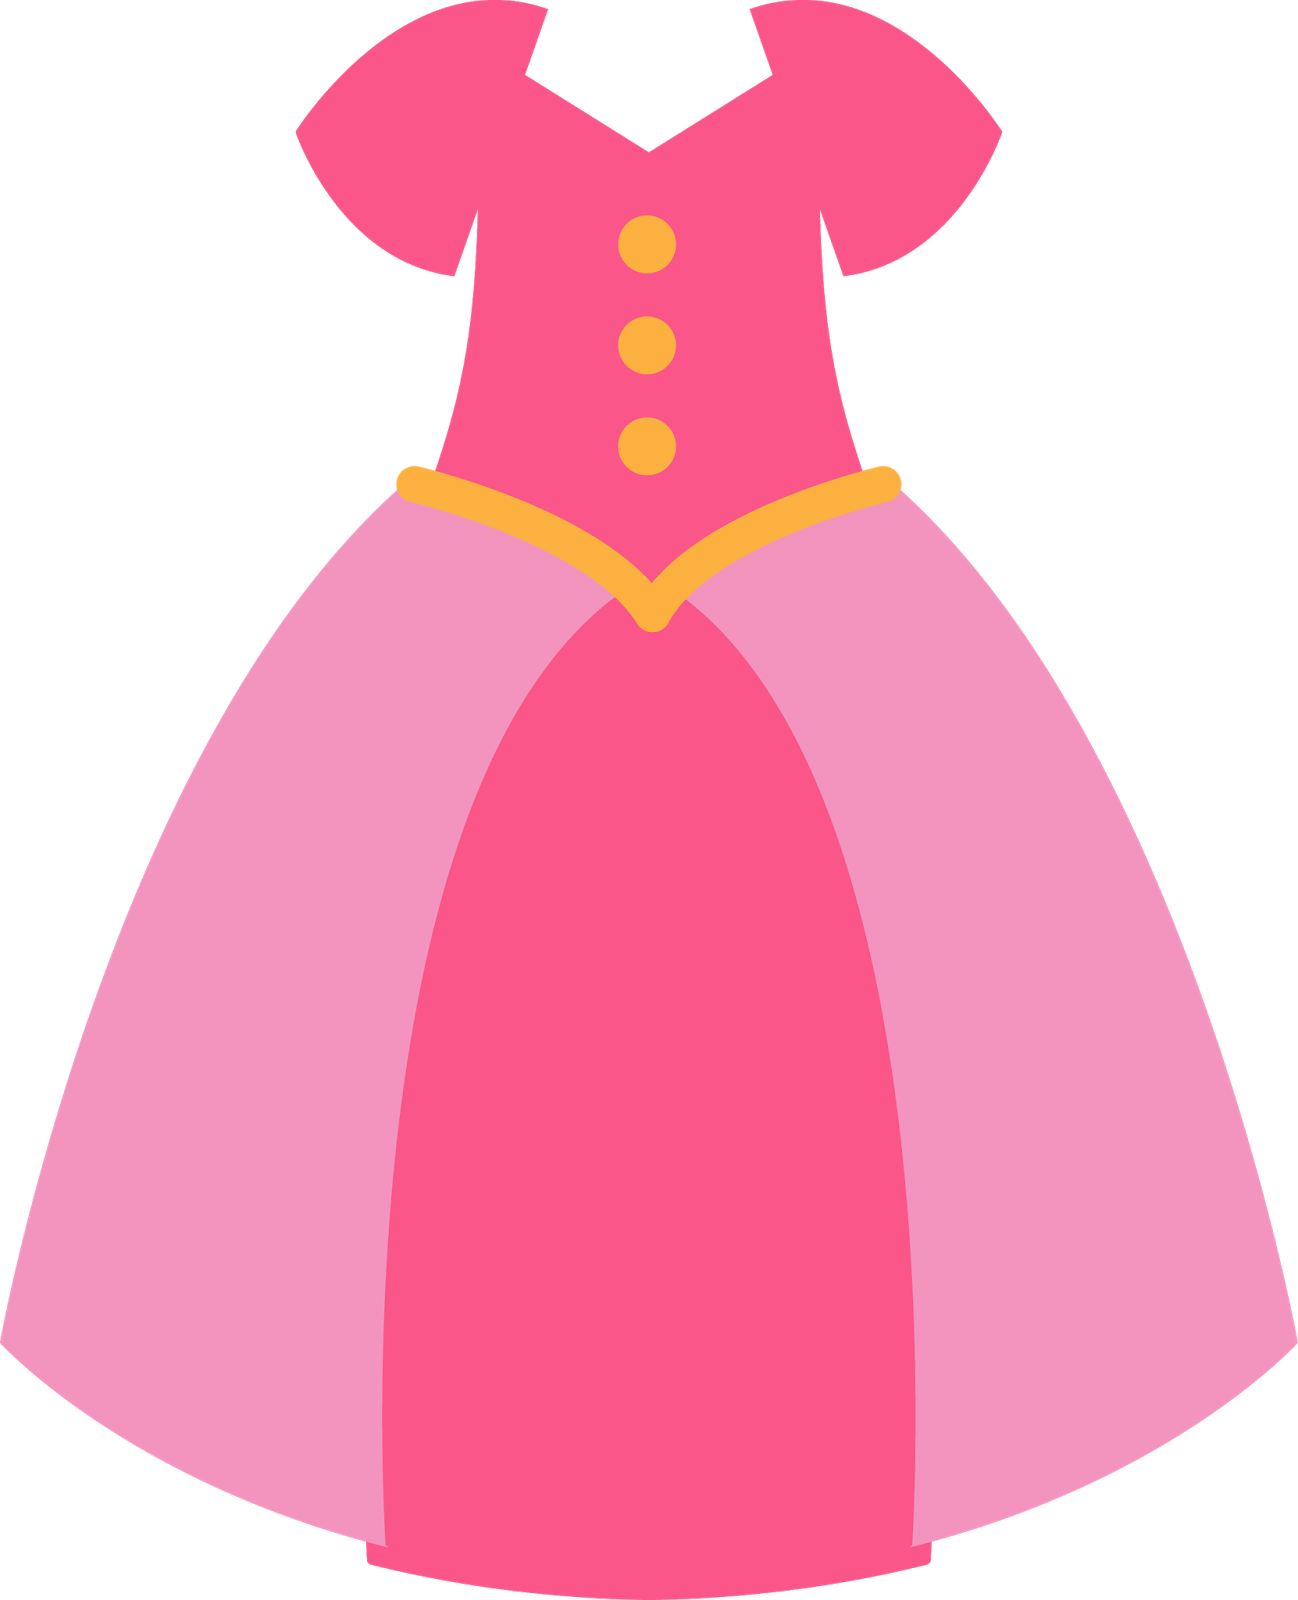 Pink Princess Clipart Oh My Fiesta in english